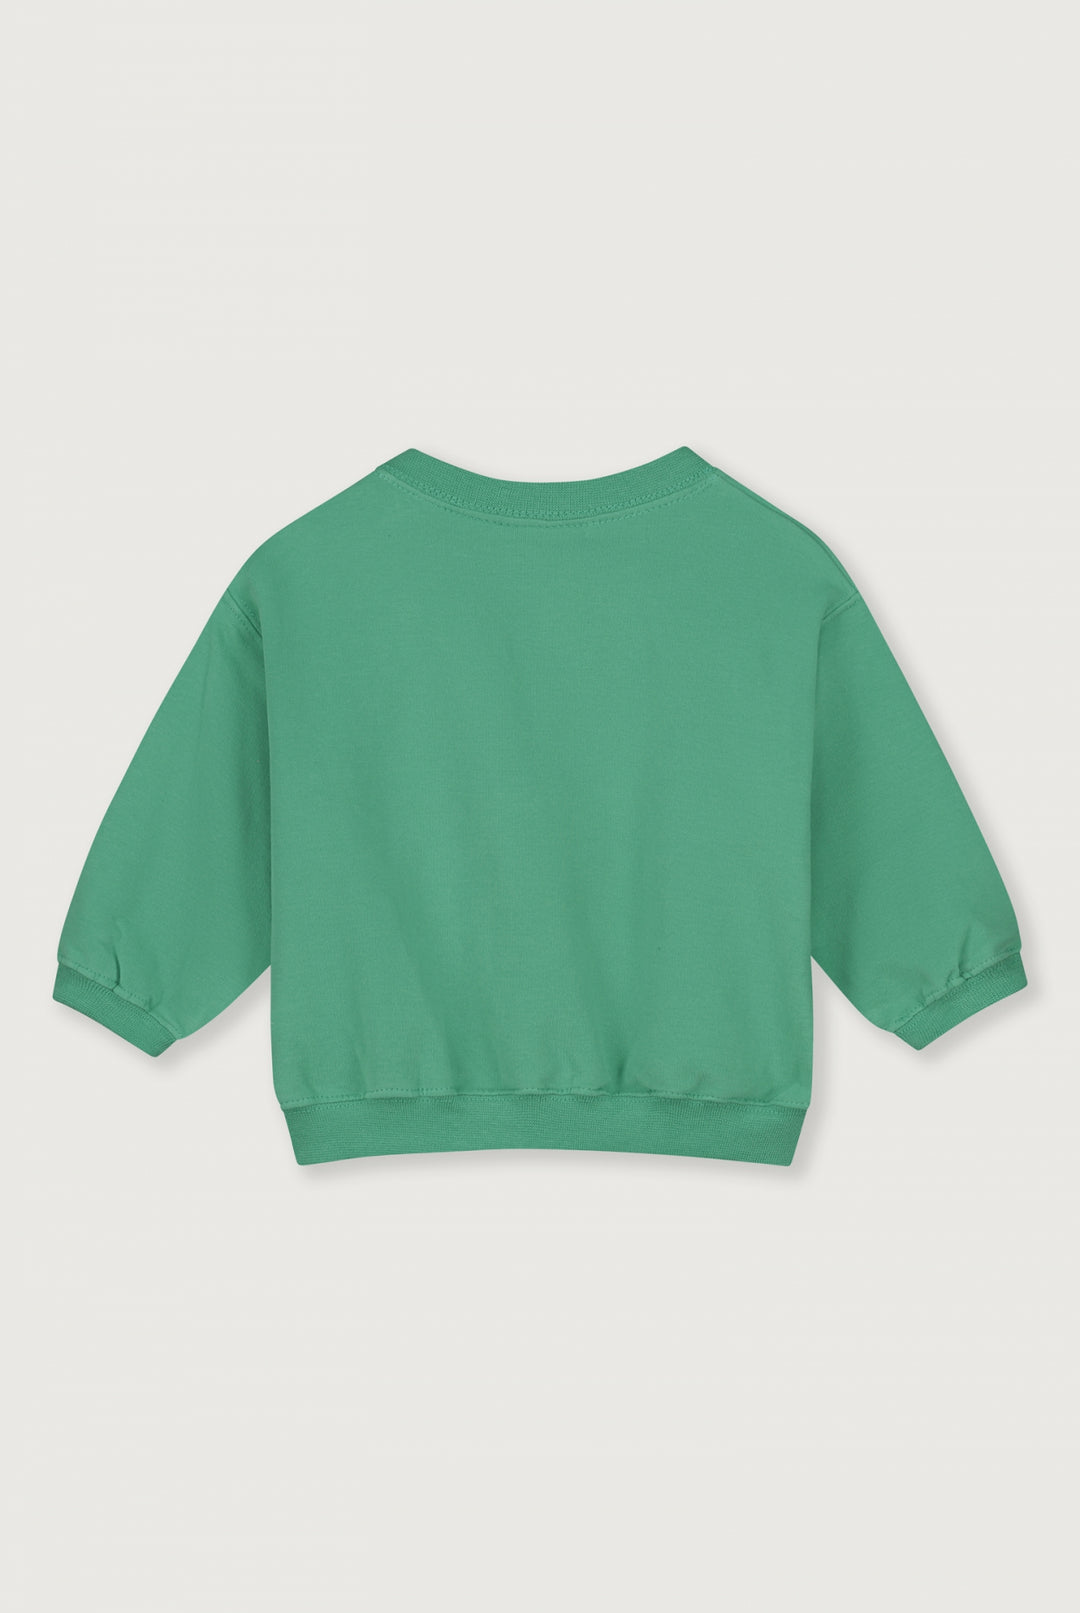 Baby Dropped Shoulder Sweater, Bright Green